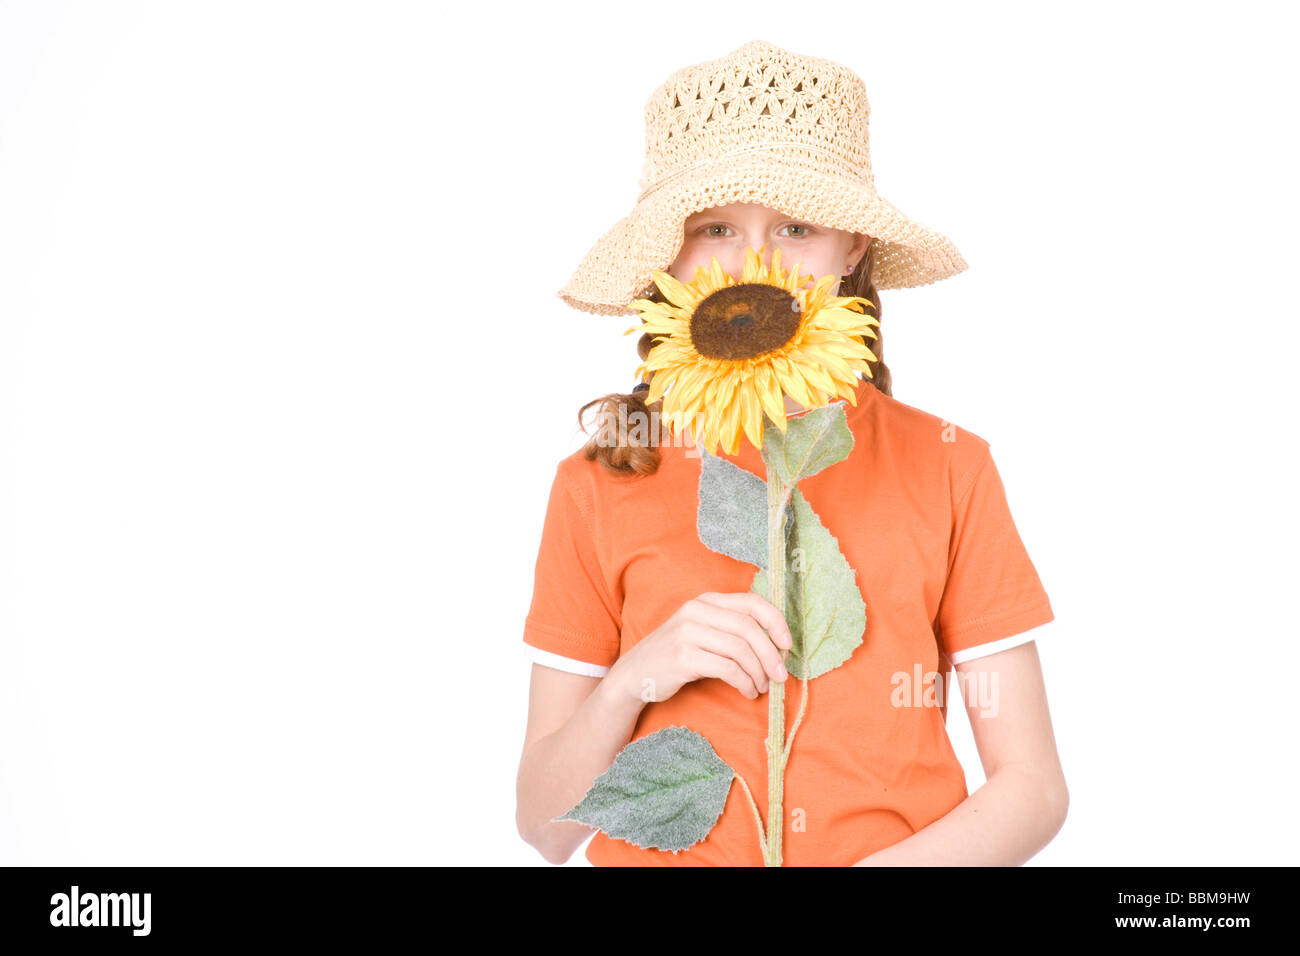 Red-haired girl with braids wearing a straw hat and holding a sunflower Stock Photo